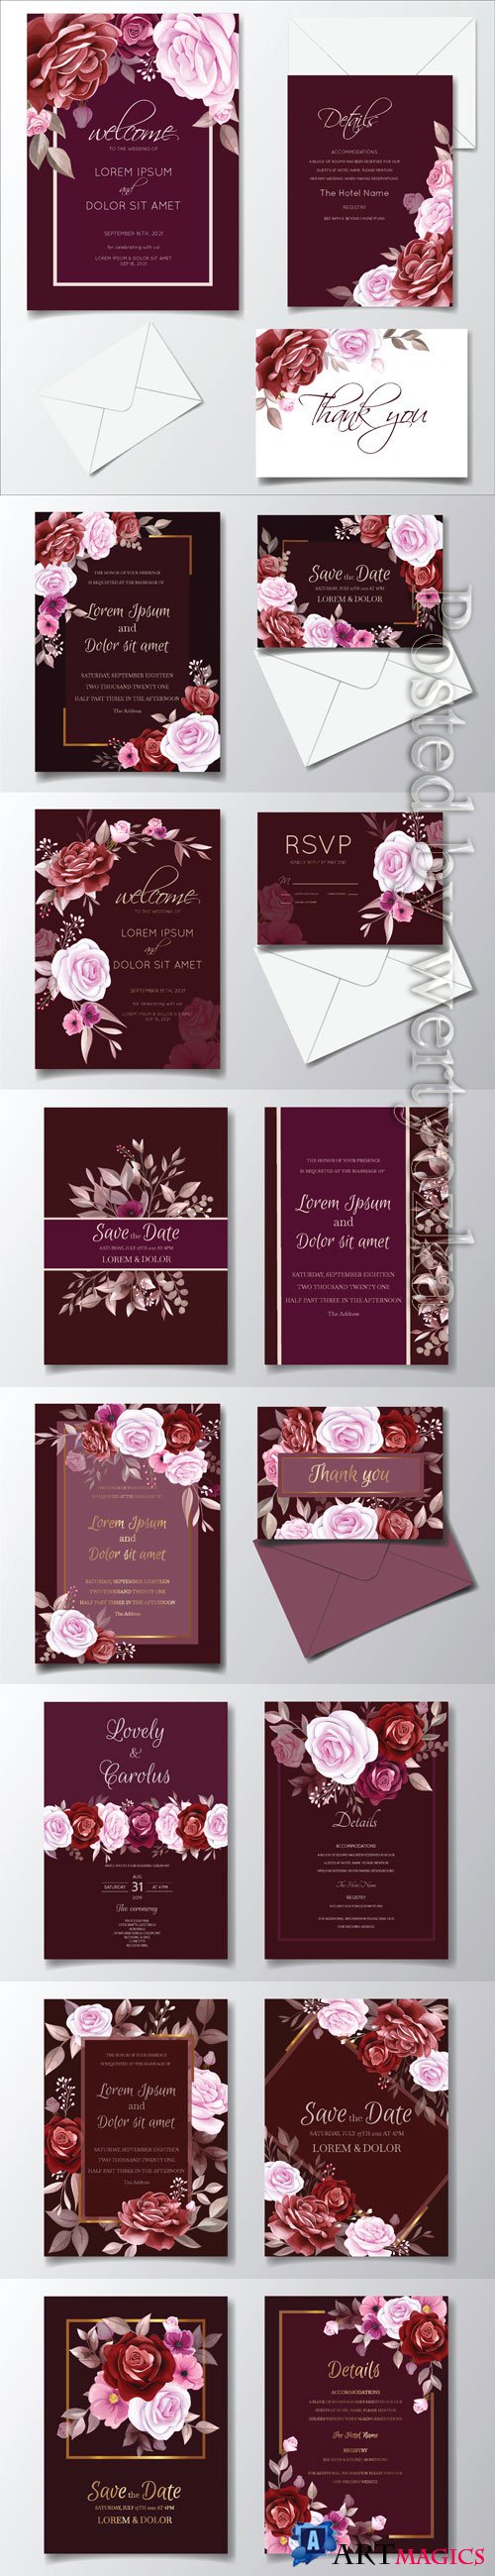 Romantic maroon wedding invitation card template set with rose, cosmos flowers, and leaves